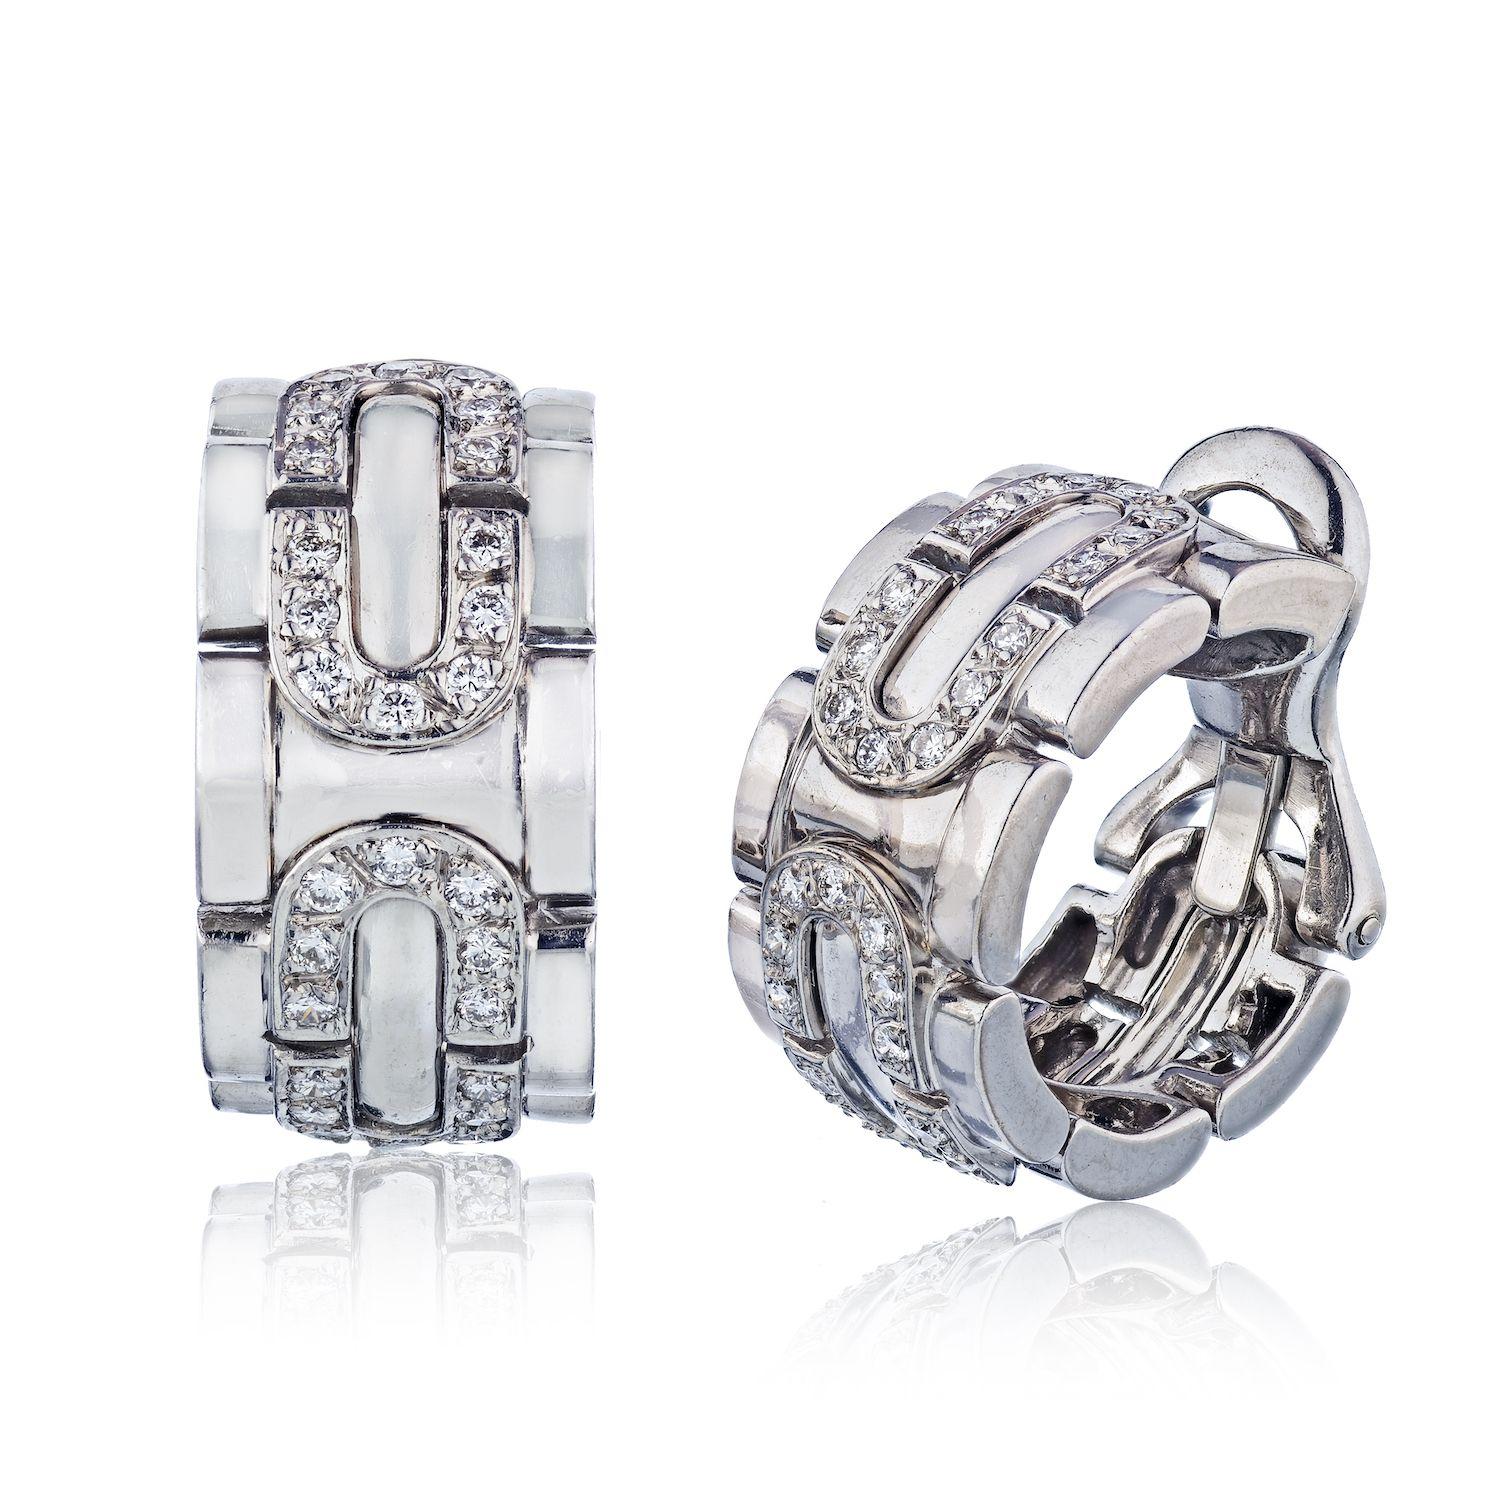 White gold diamond ring and earrings by Cartier 1996. Earrings are for pierced earrings. 
Ring measures: Size 51 EU, US 5.75, width 0.45inches
Earrings measure: 1 inch long, and 0.4 inches wide
